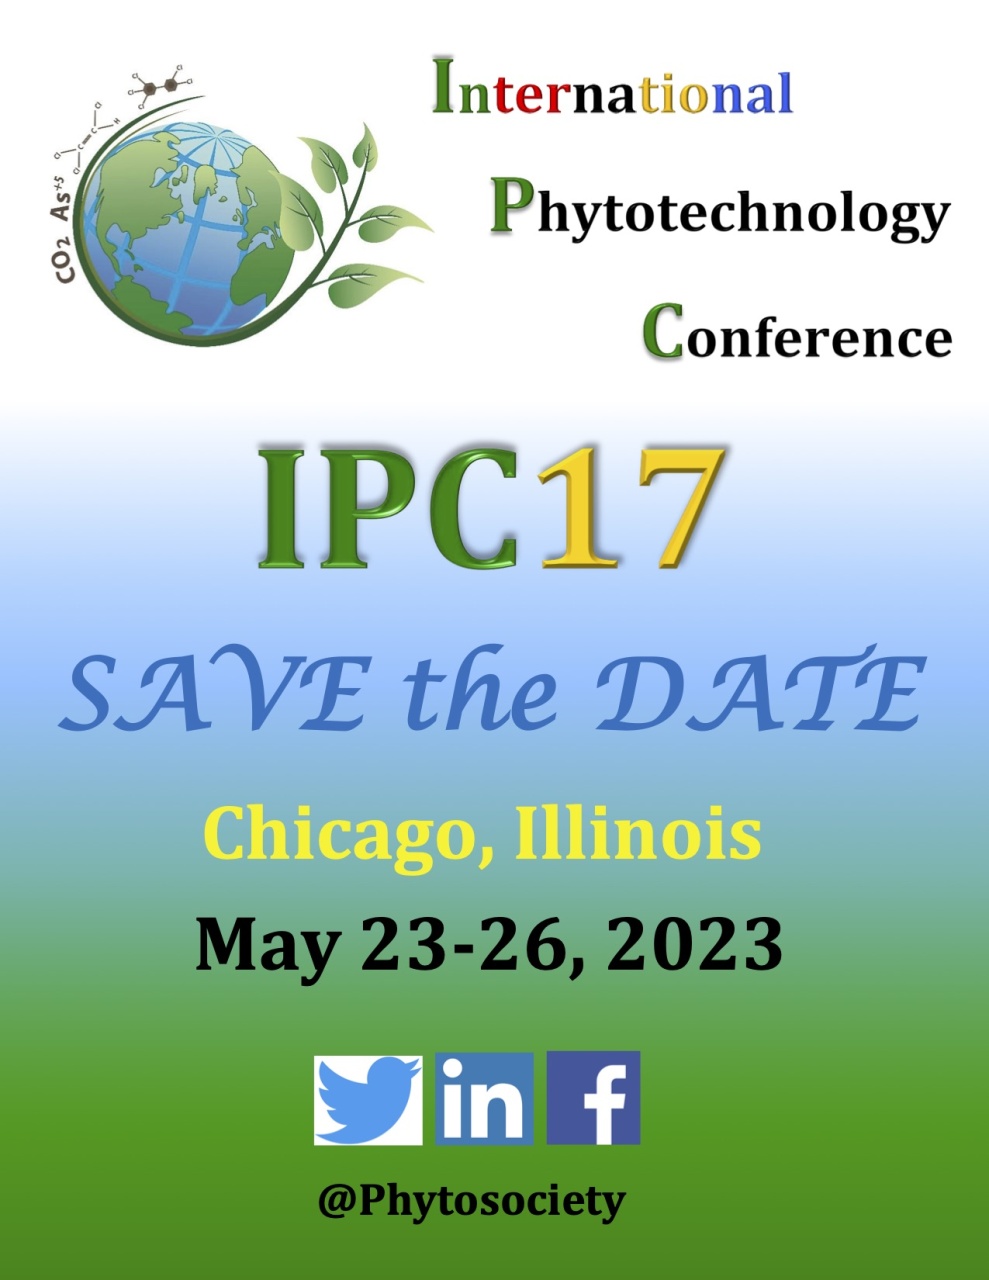 Now Announcing our next International Phytotechnology Conference - IPC17 in 2023 - in Chicago, Illinois !